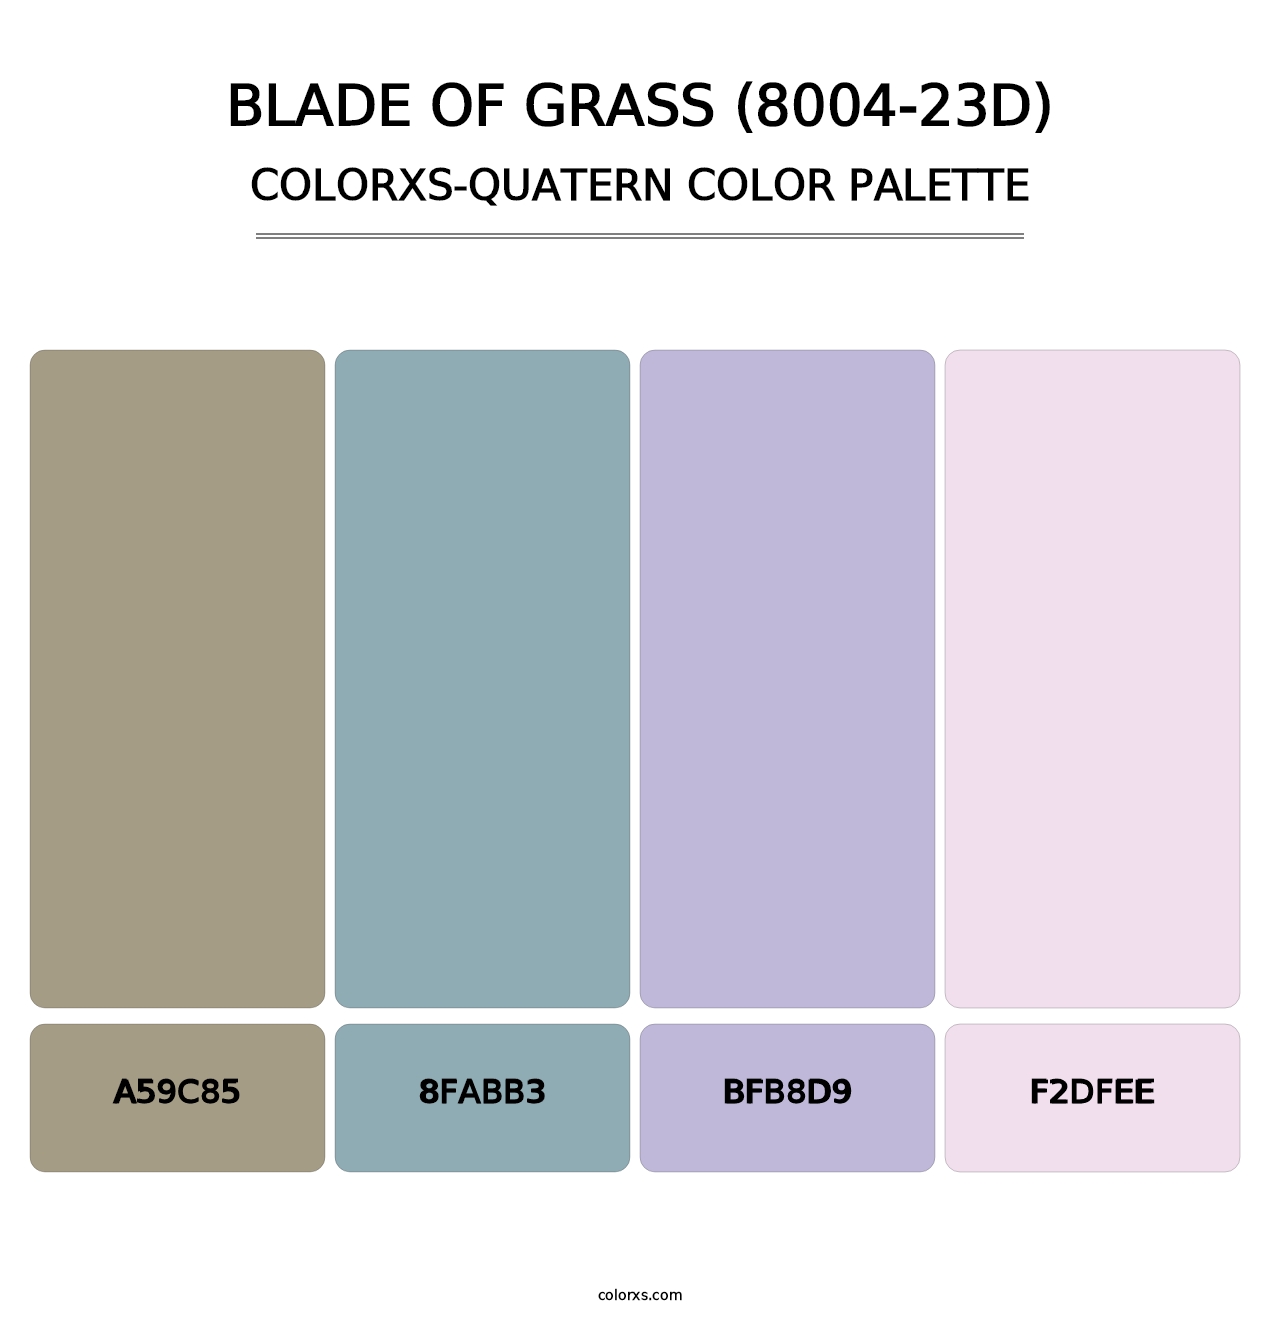 Blade of Grass (8004-23D) - Colorxs Quatern Palette